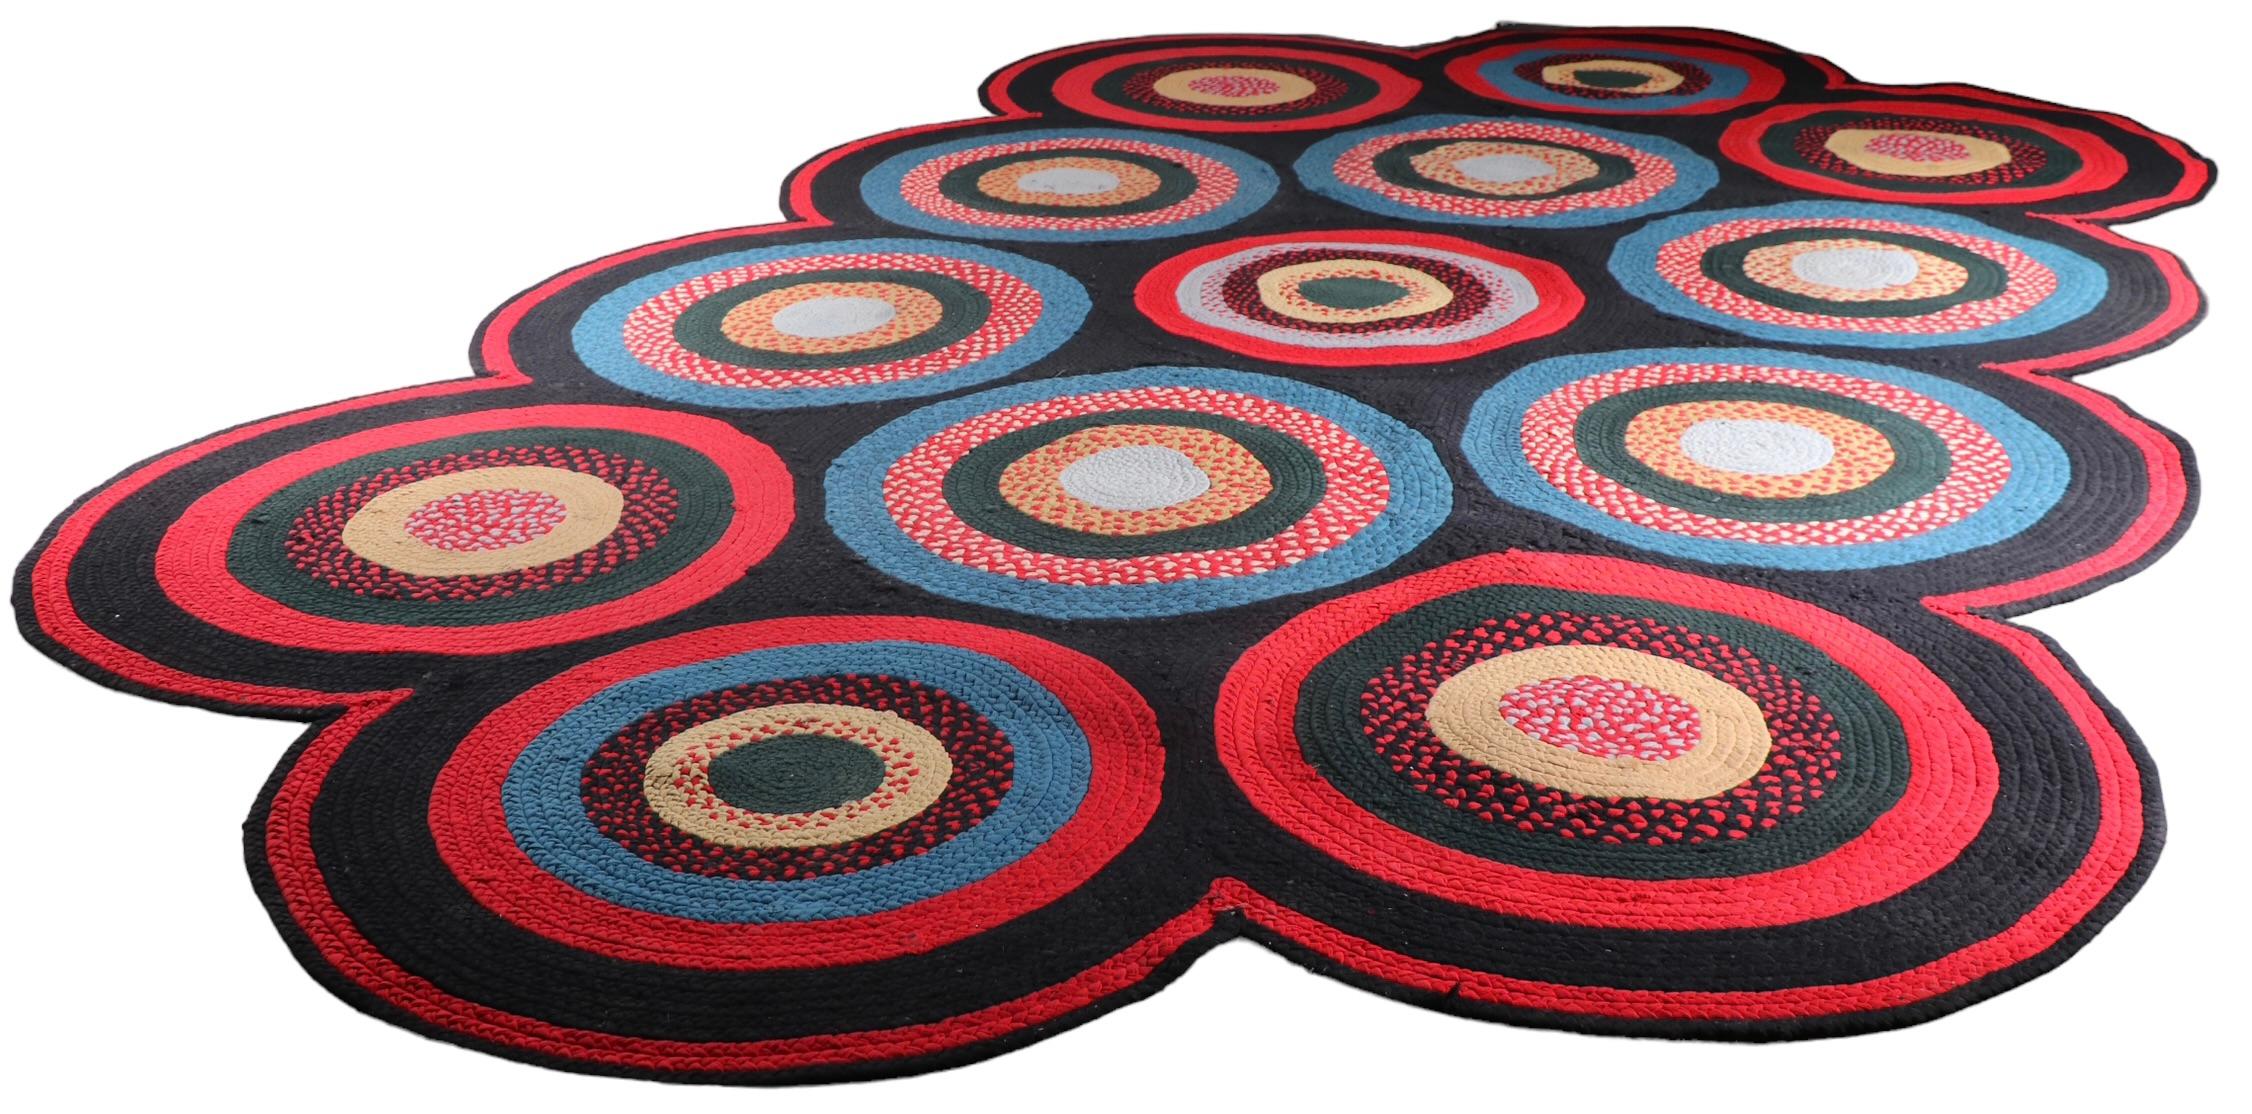 Incredible room size braided rug featuring repeating disks of expanding concentric rings of polychrome fabric on a  black background. While this is a country style rug, its bold, graphic and geometric pattern makes it suitable for a more modern